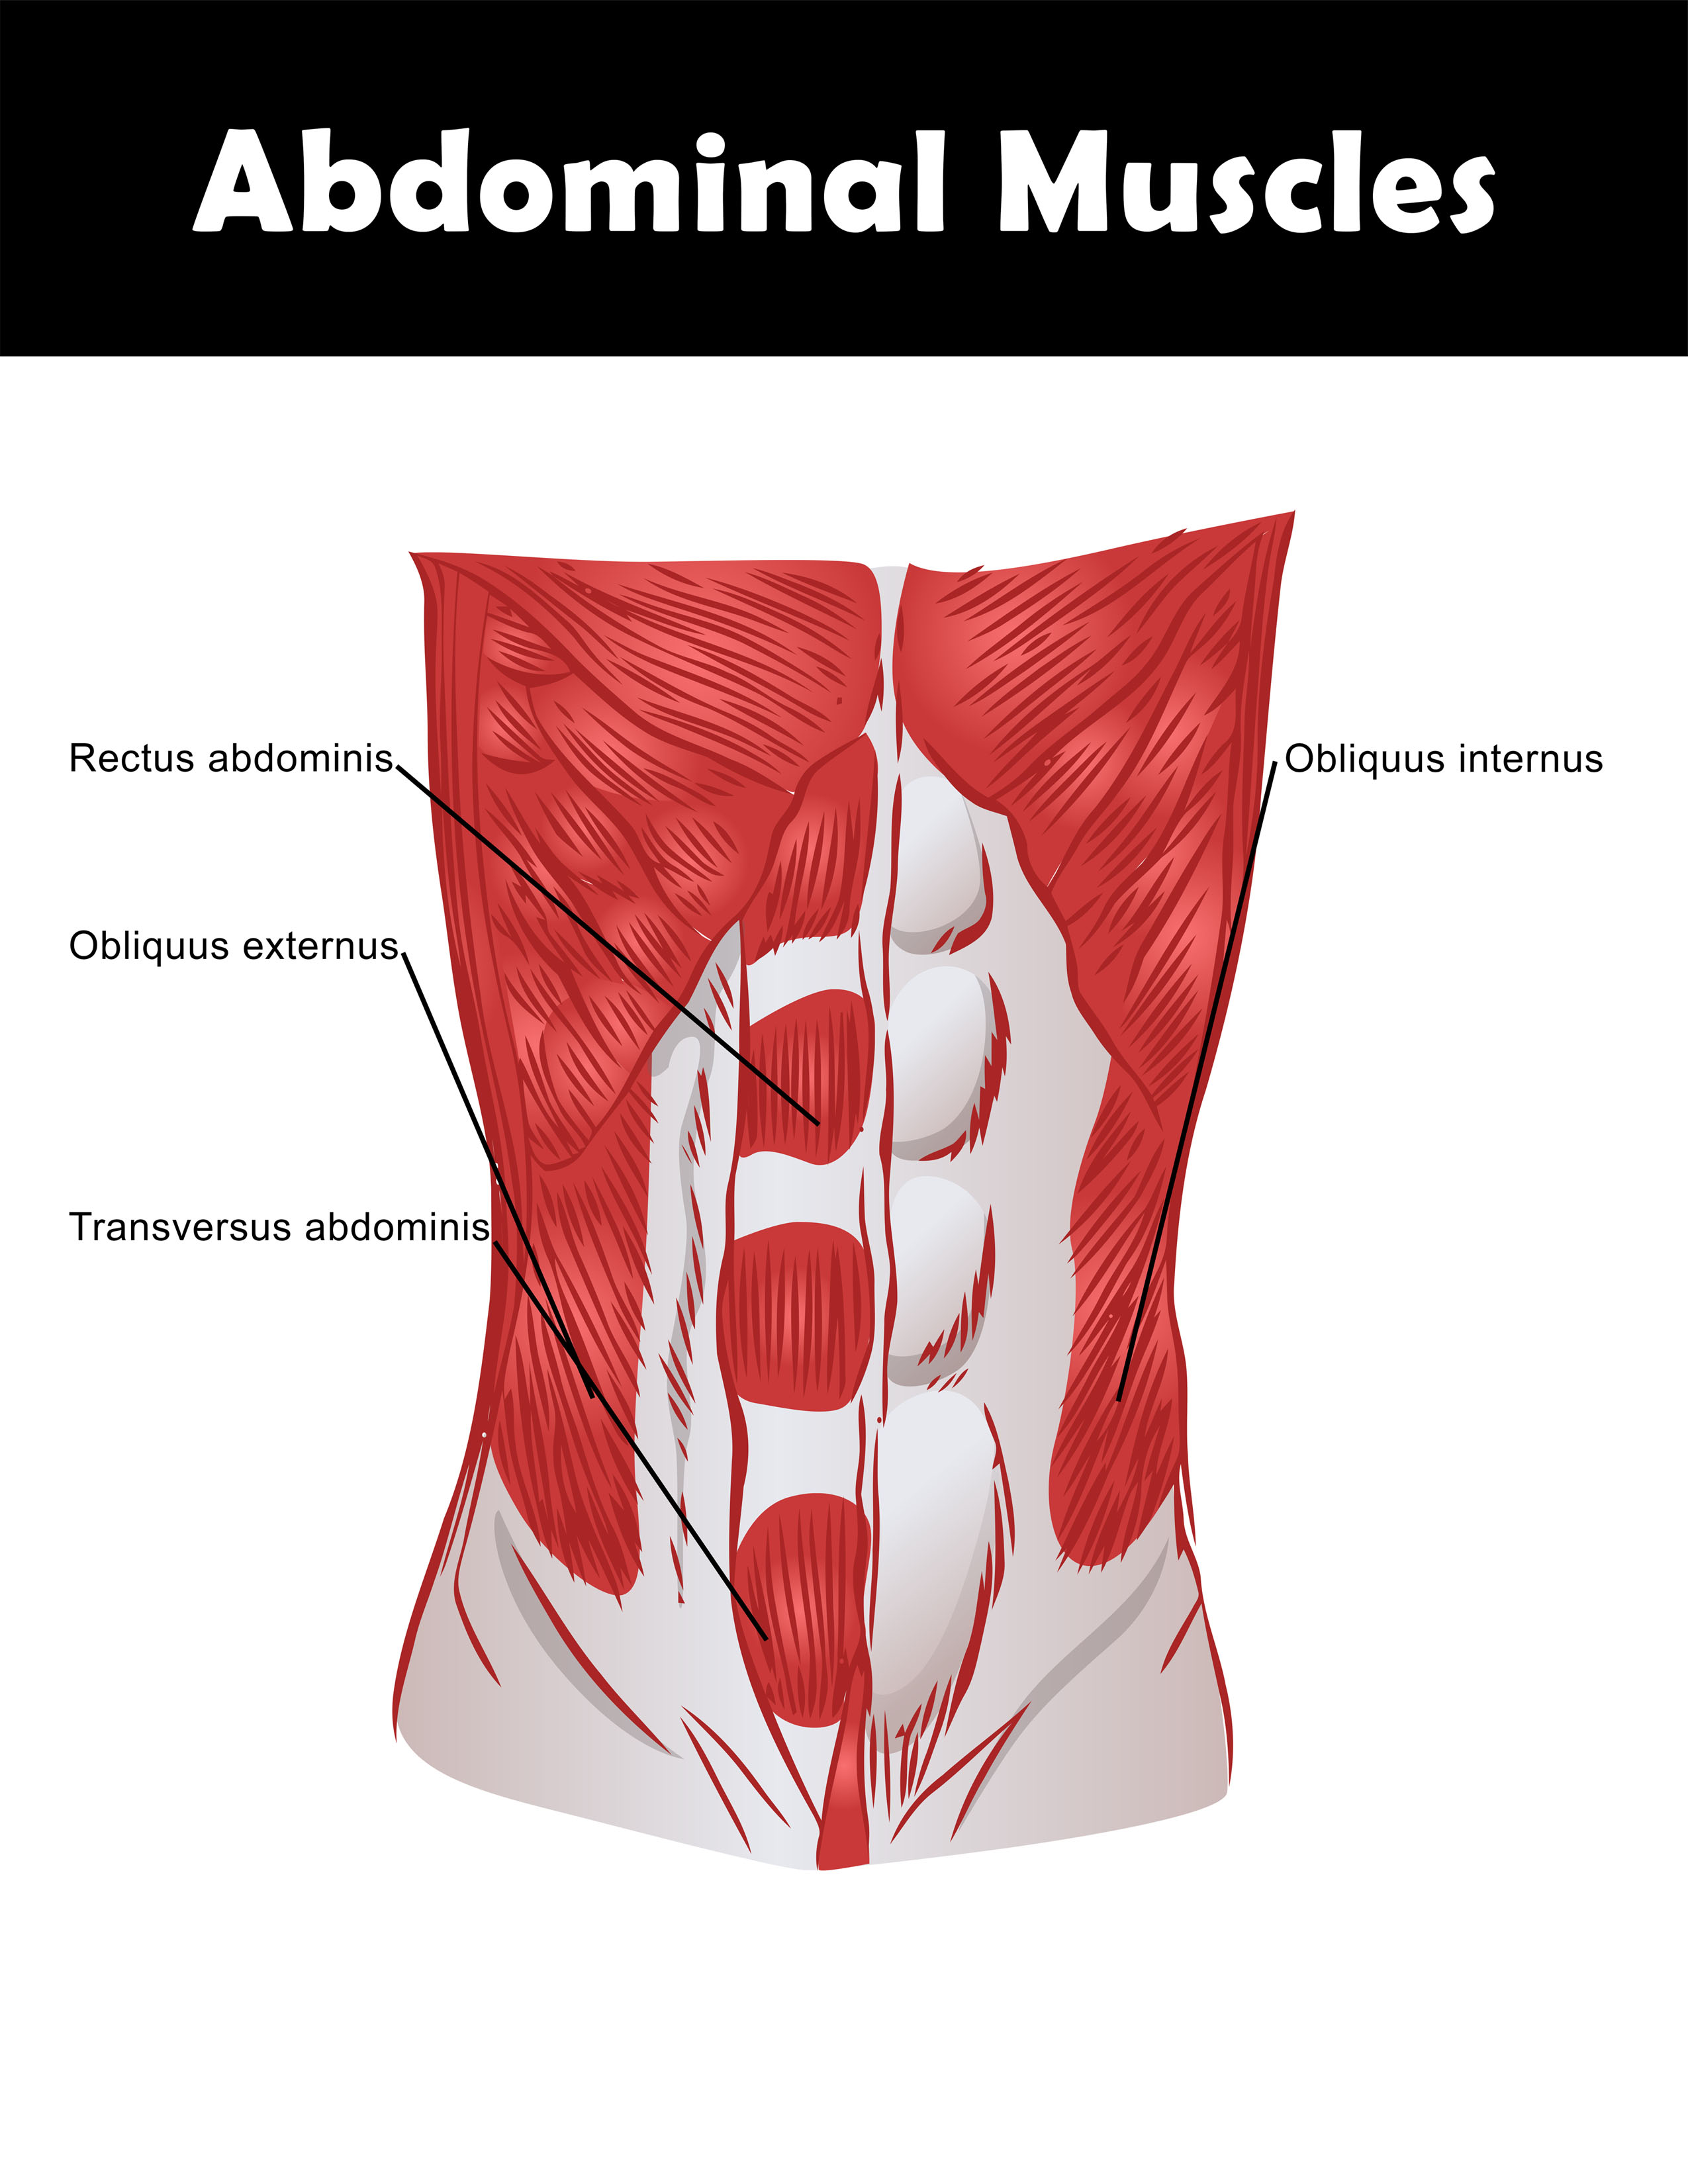 Abdominal muscle anatomy chart you can download and print.